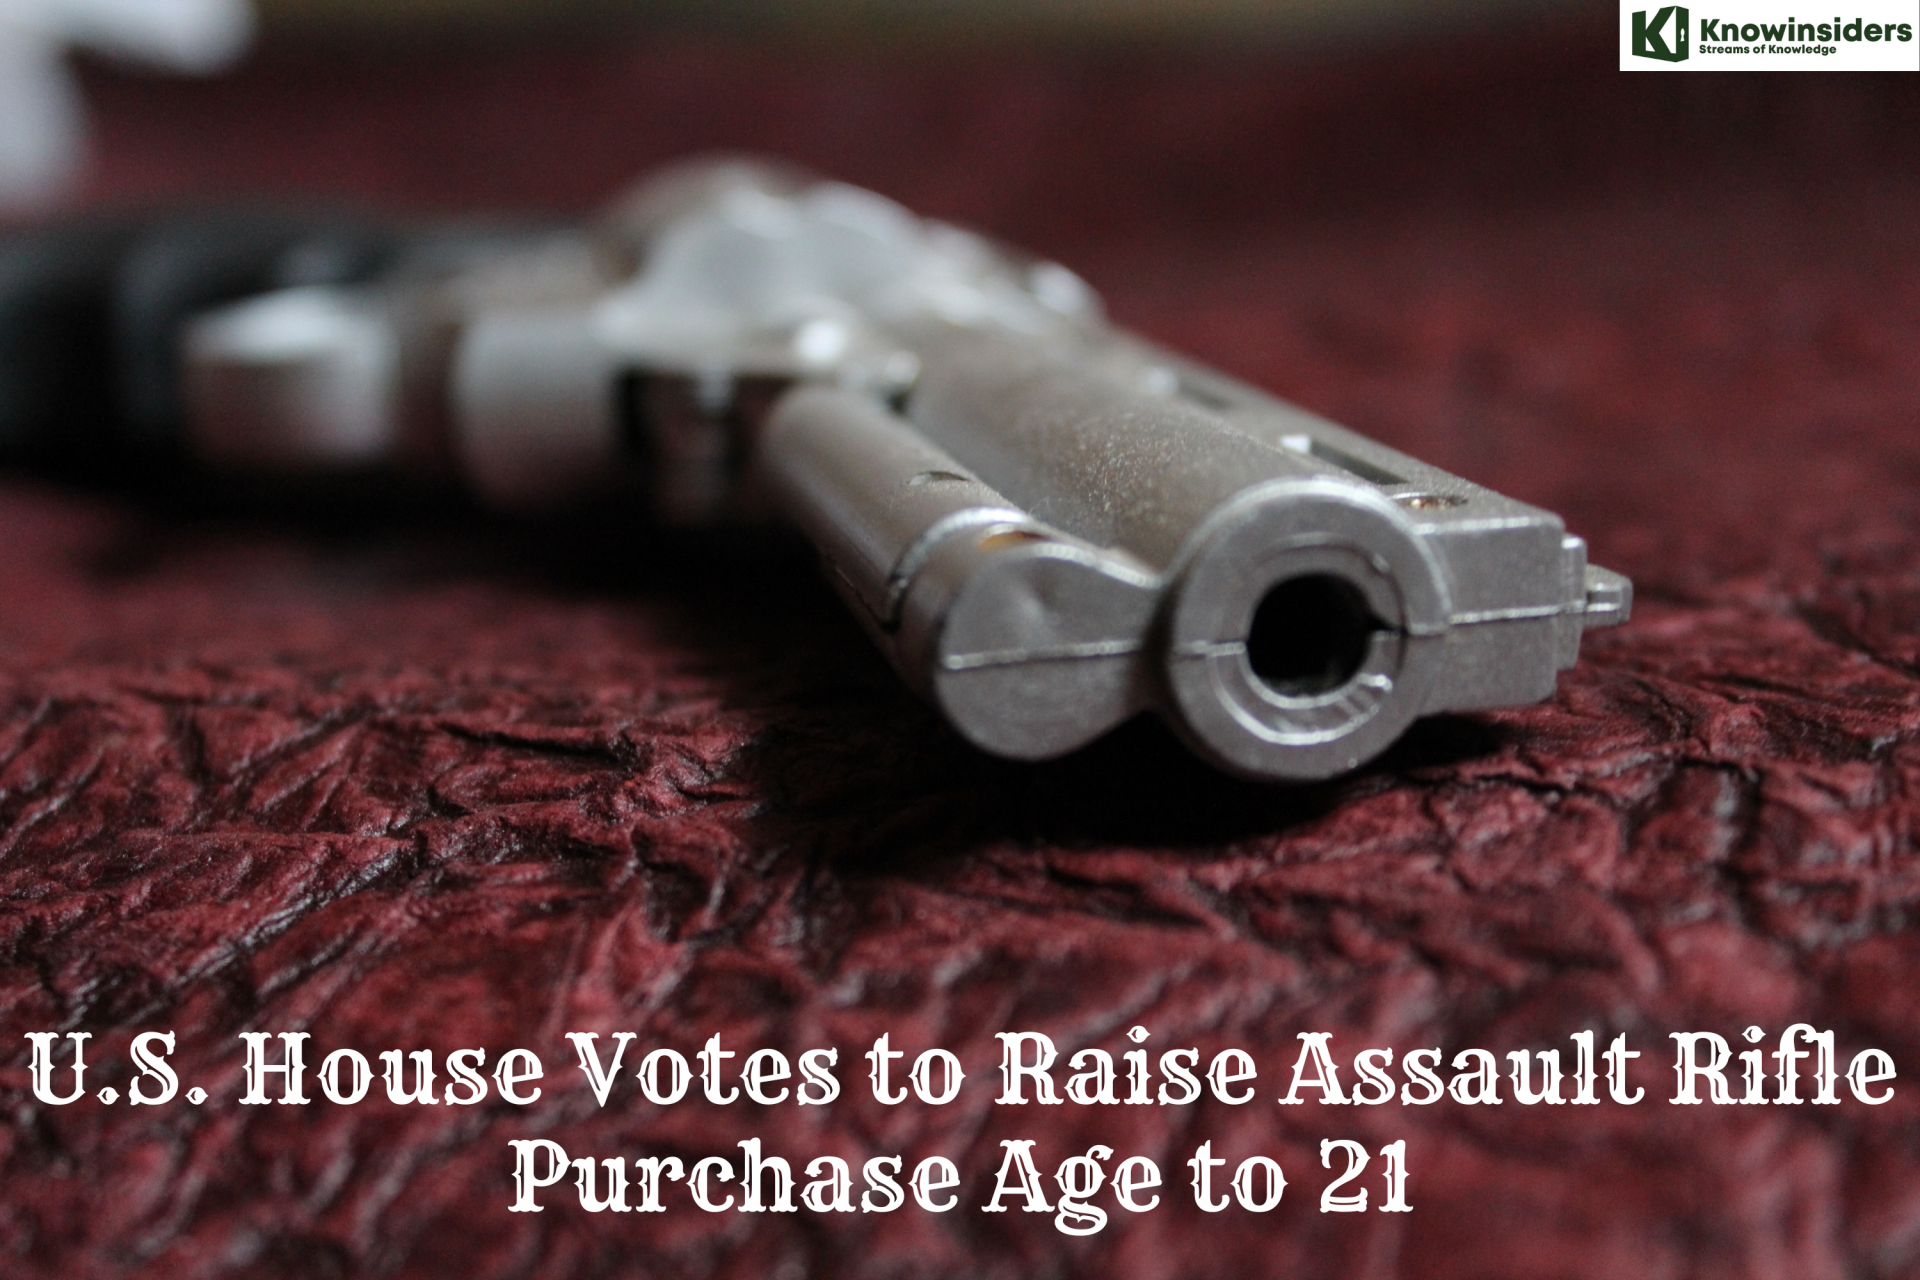 U.S. House Votes to Raise Assault Rifle Purchase Age to 21